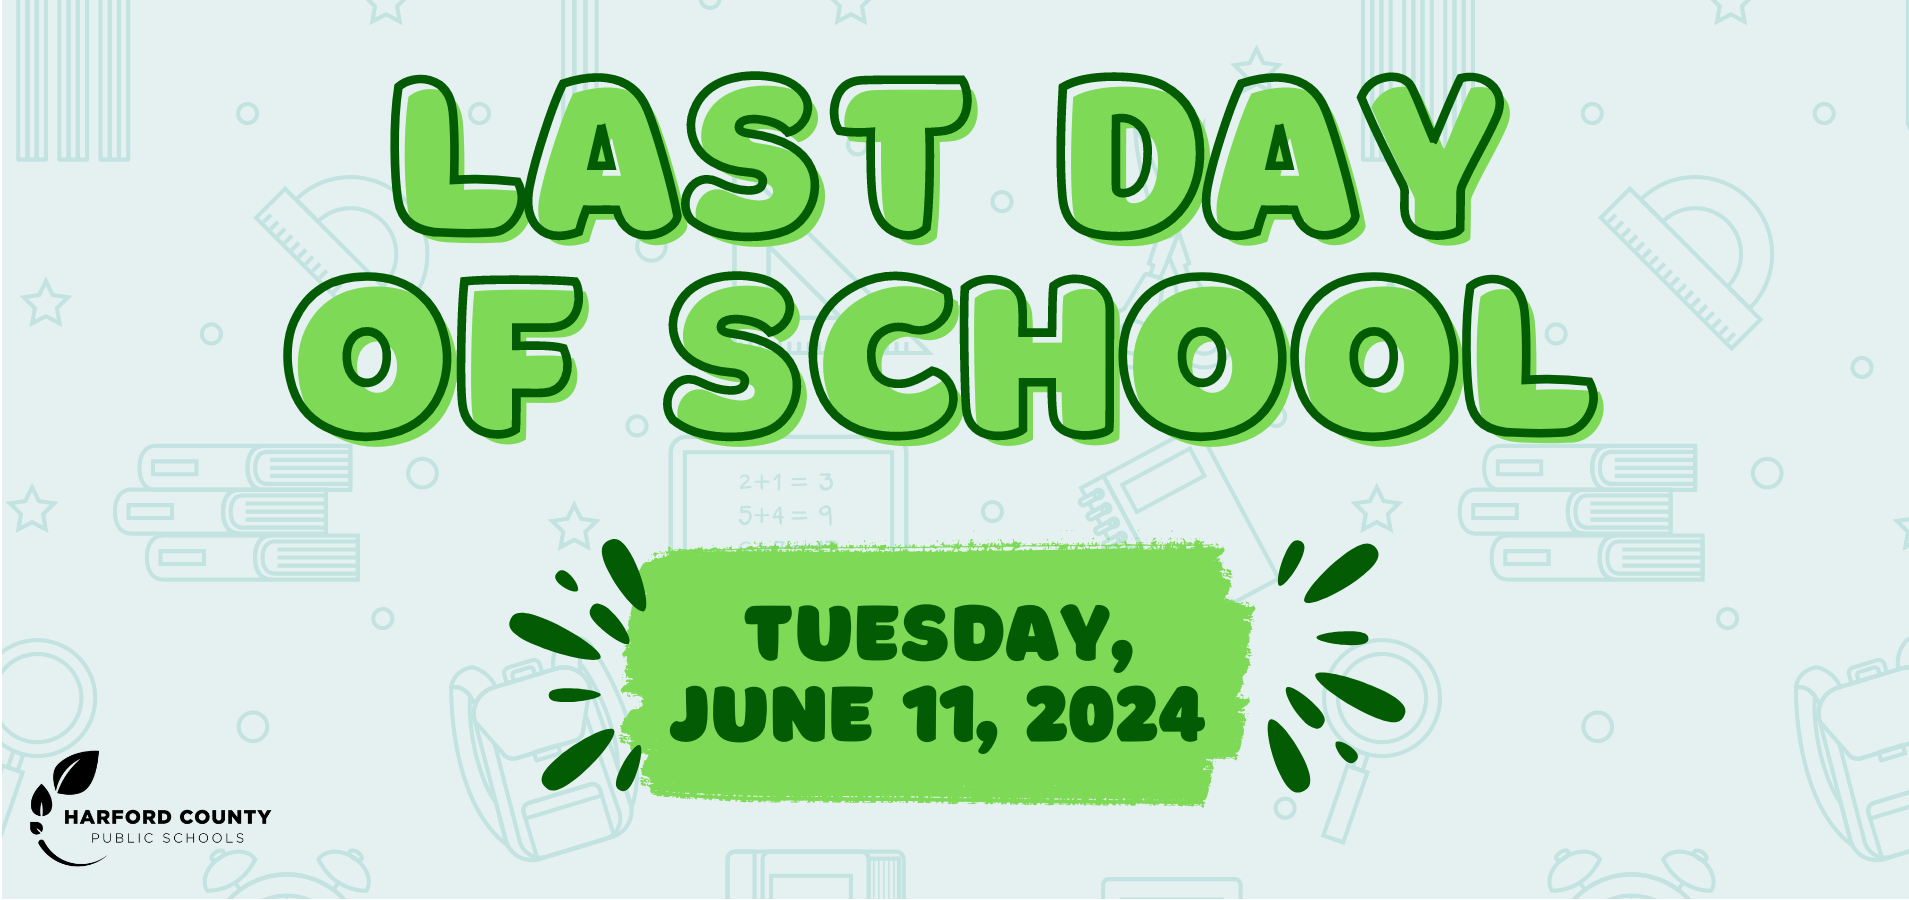 Last Day of School is Tuesday, June 11, 2024